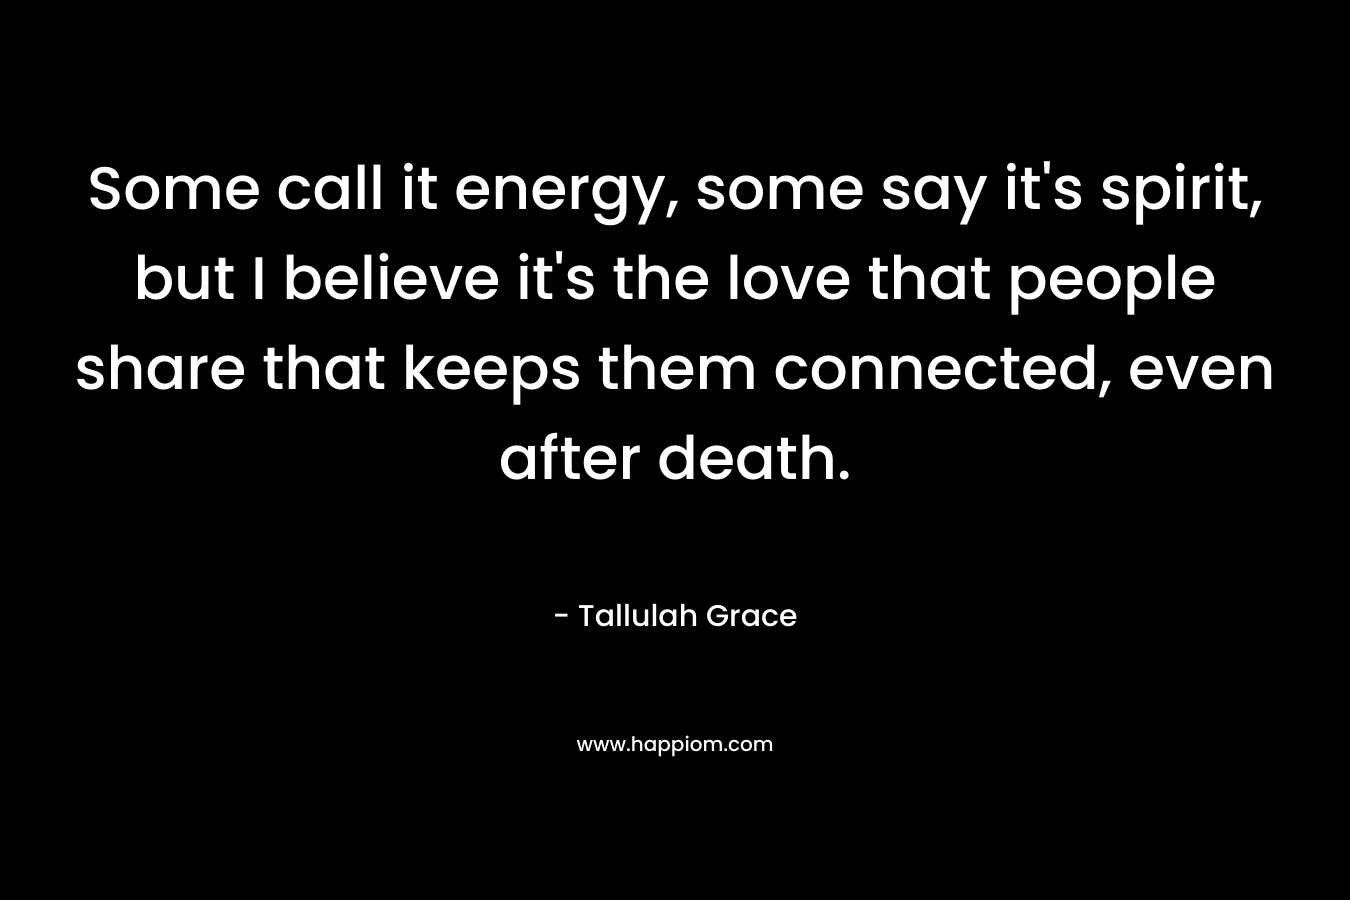 Some call it energy, some say it's spirit, but I believe it's the love that people share that keeps them connected, even after death.